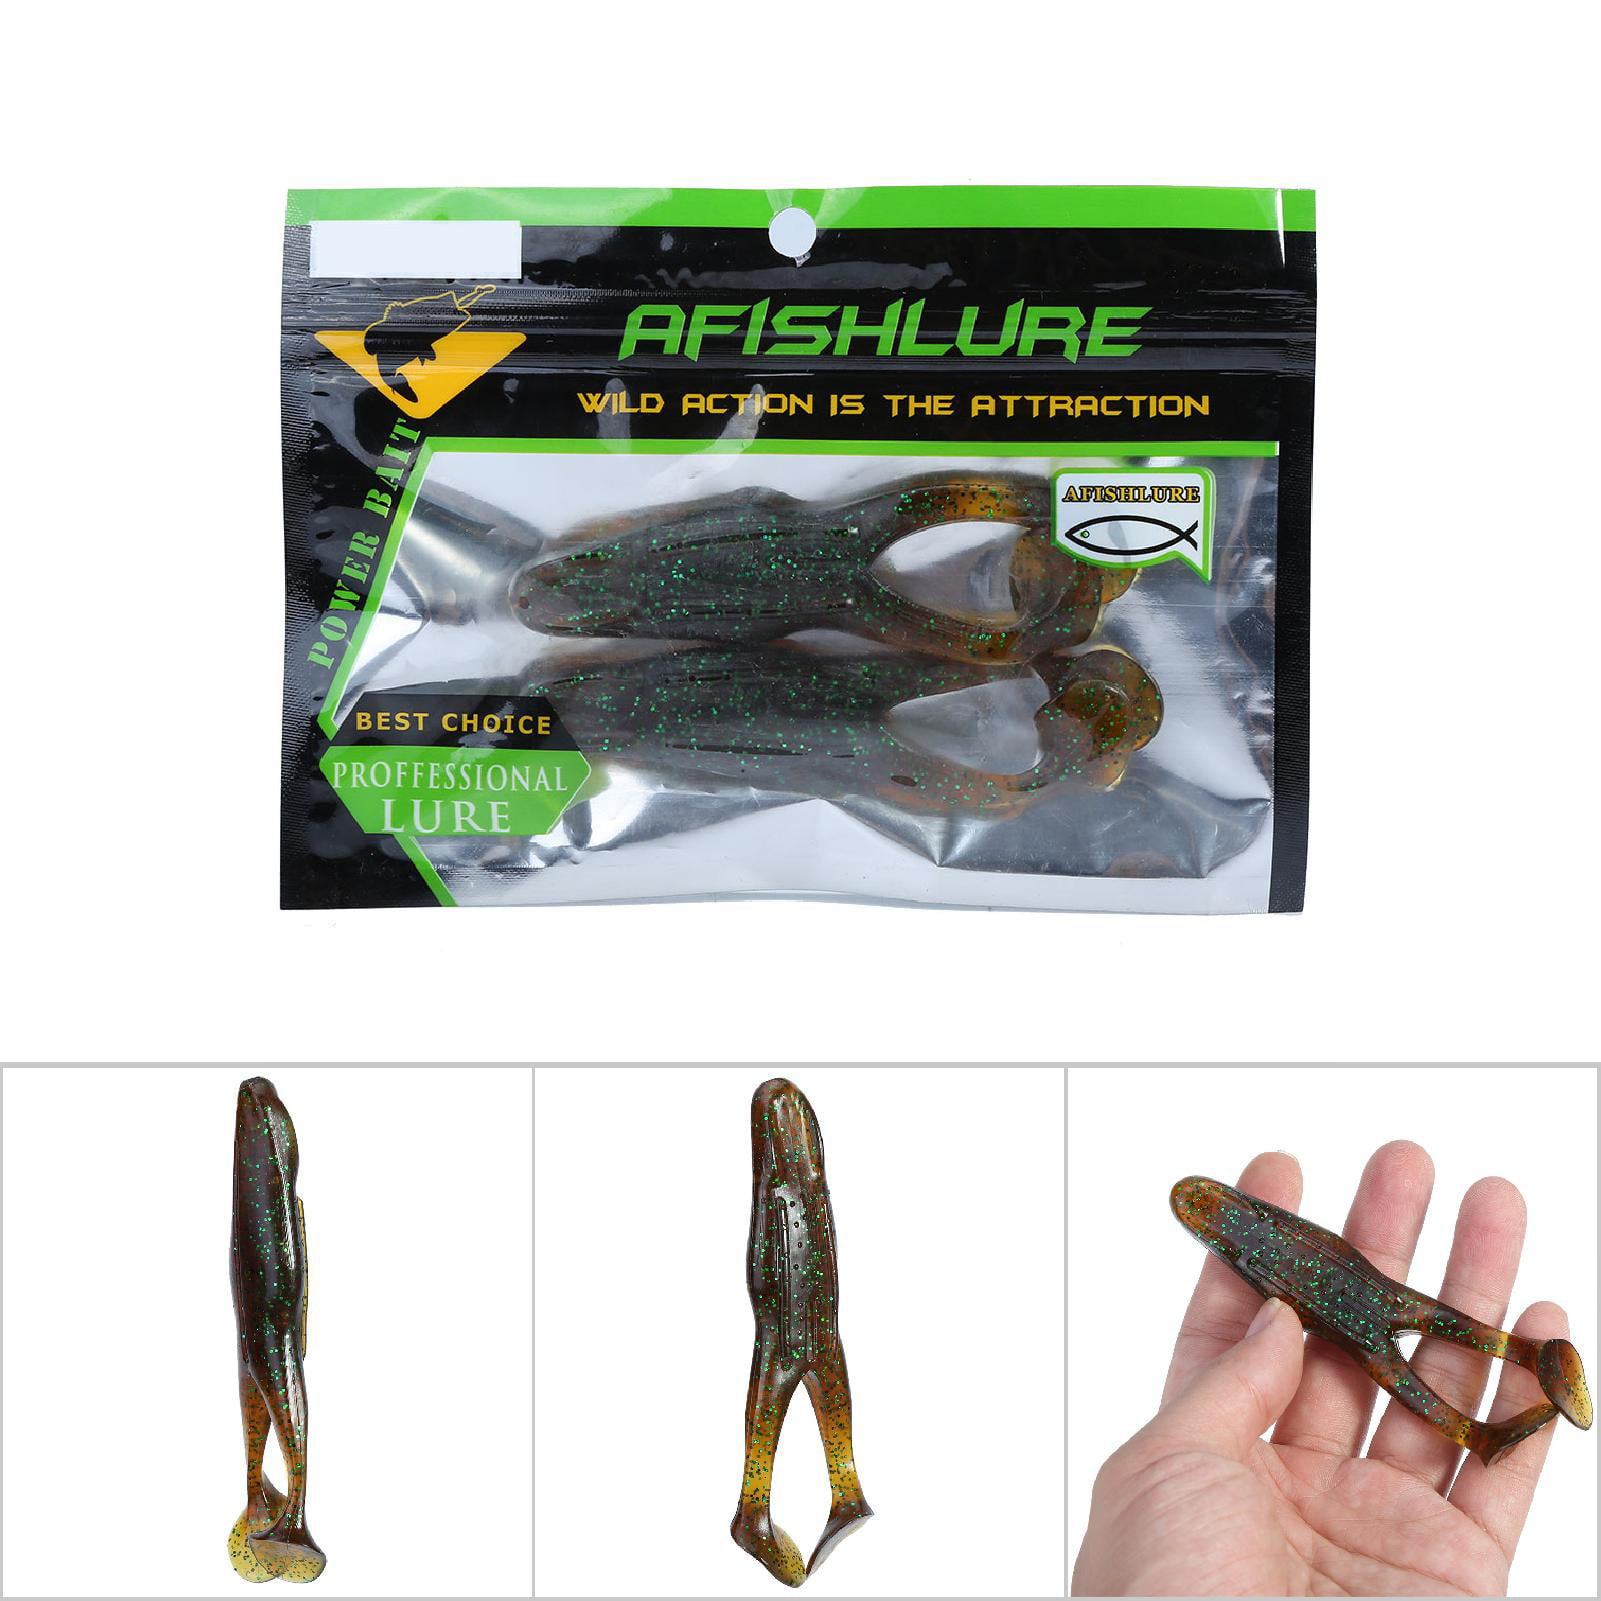 2Pcs/Lot Lifelike Lures, Easy To Carry Shape Lures, Shape Bait Fish  Accessory For River Fishing, Ocean Boat Fishing 